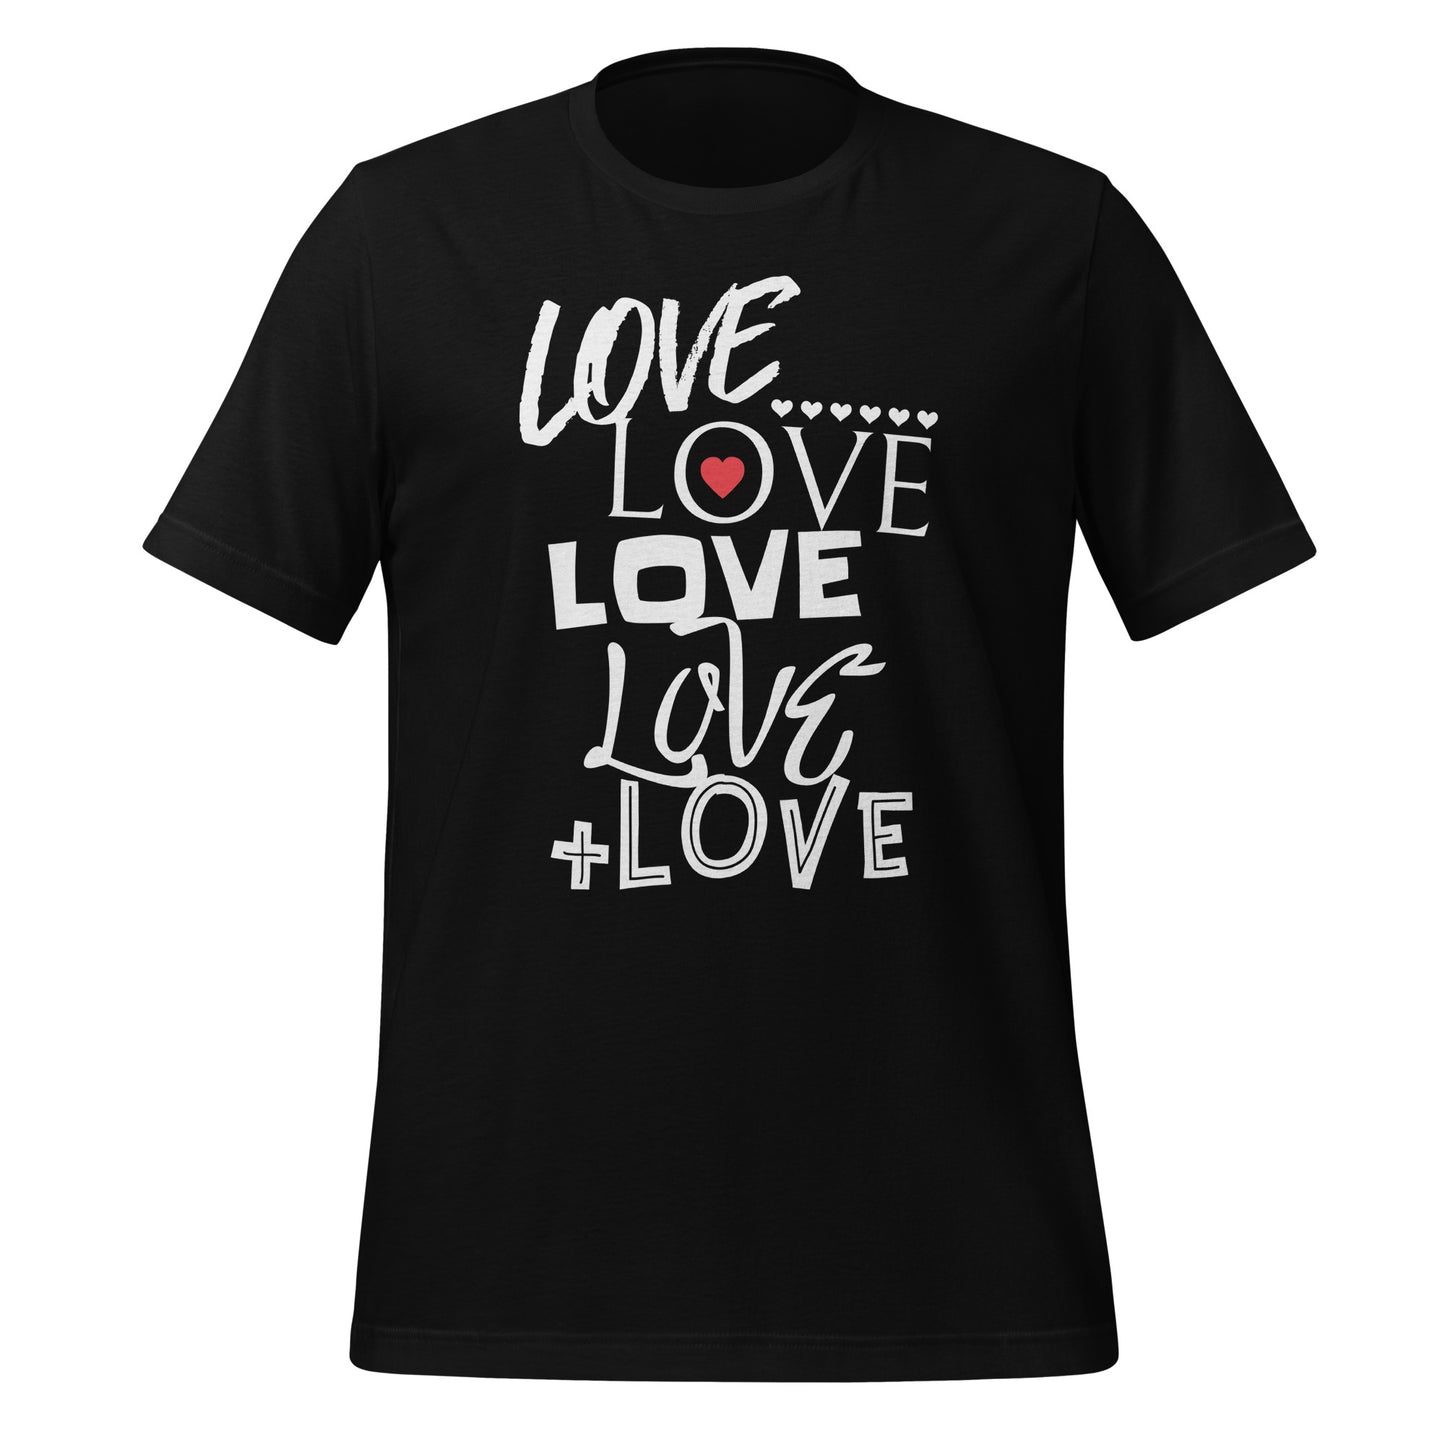 Lots of LOVE Adult T-shirt